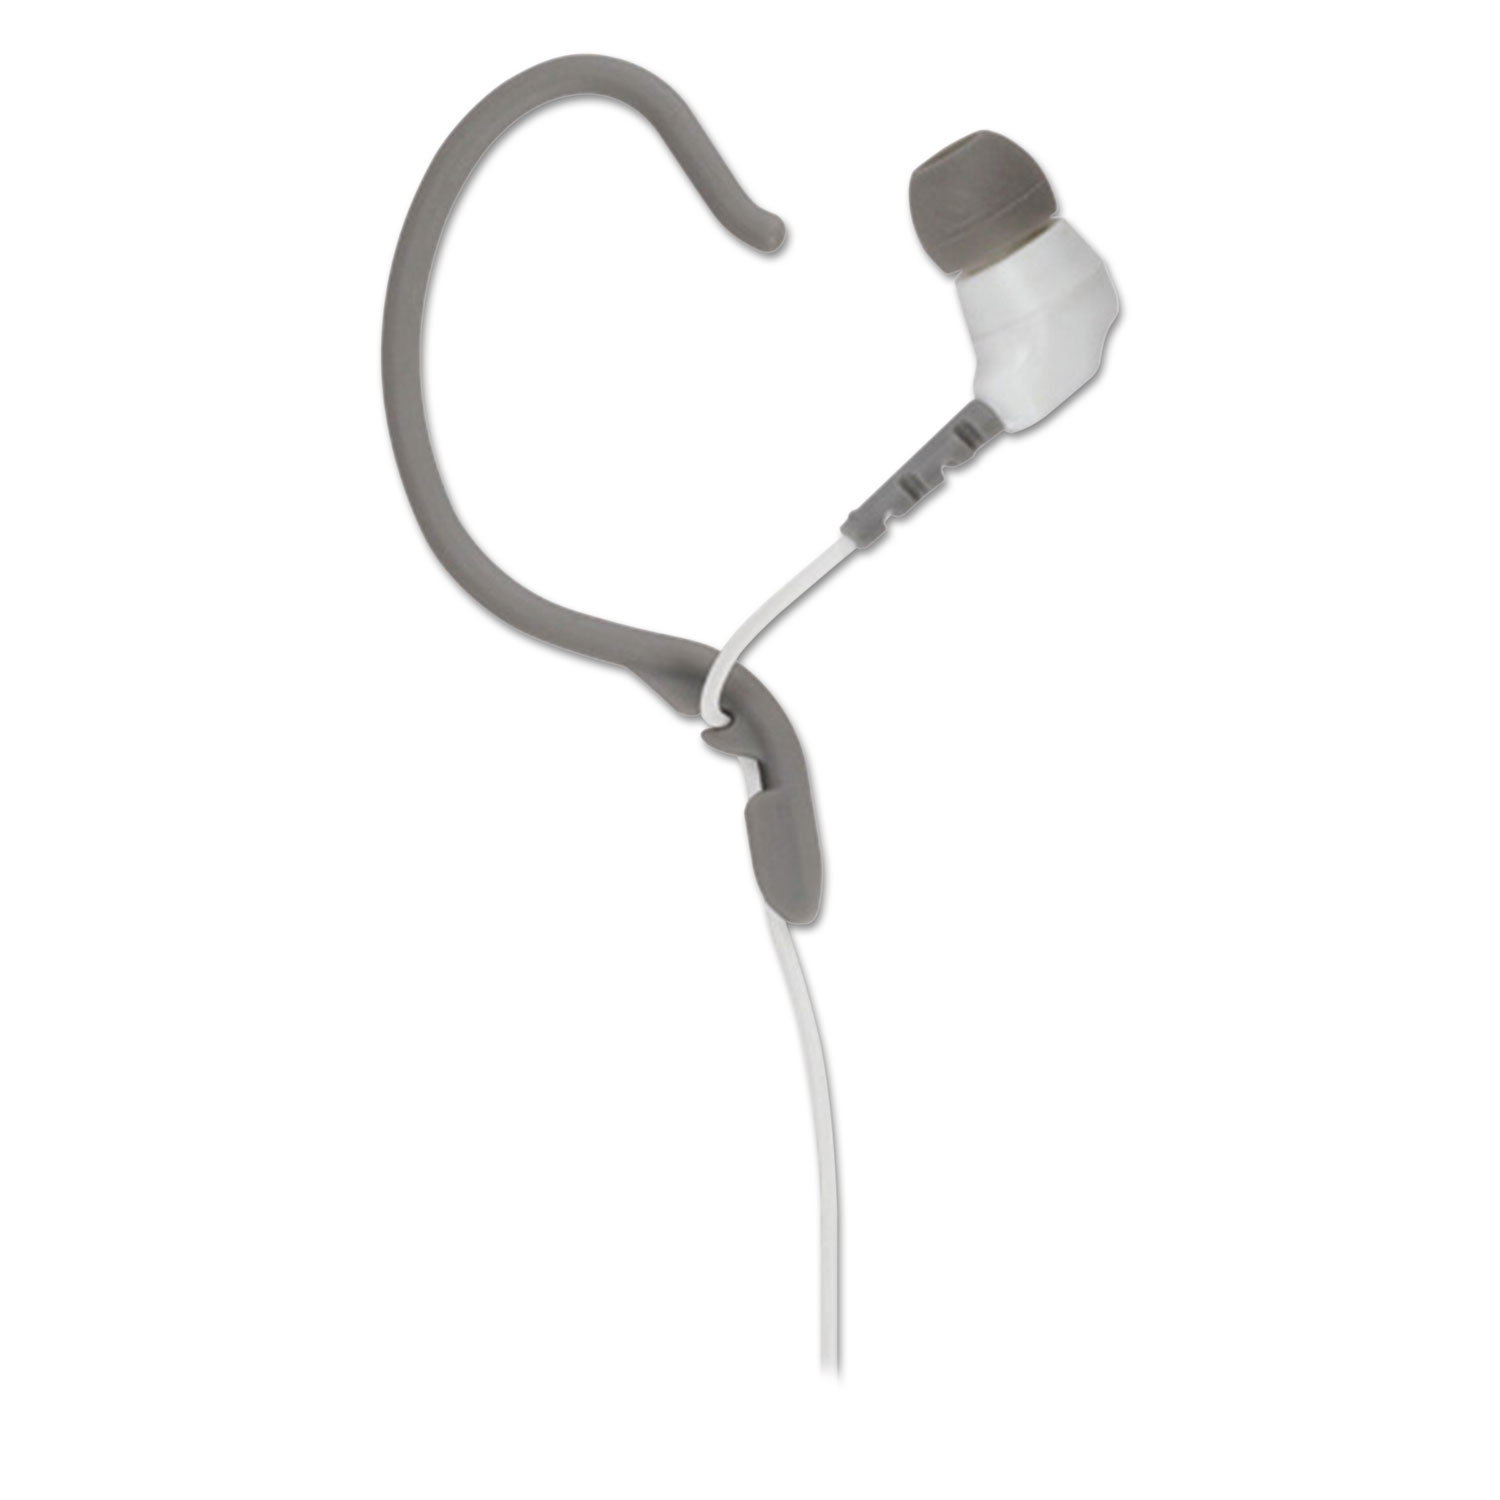 thudBUDS Noise Isolation Sport Earbuds, White